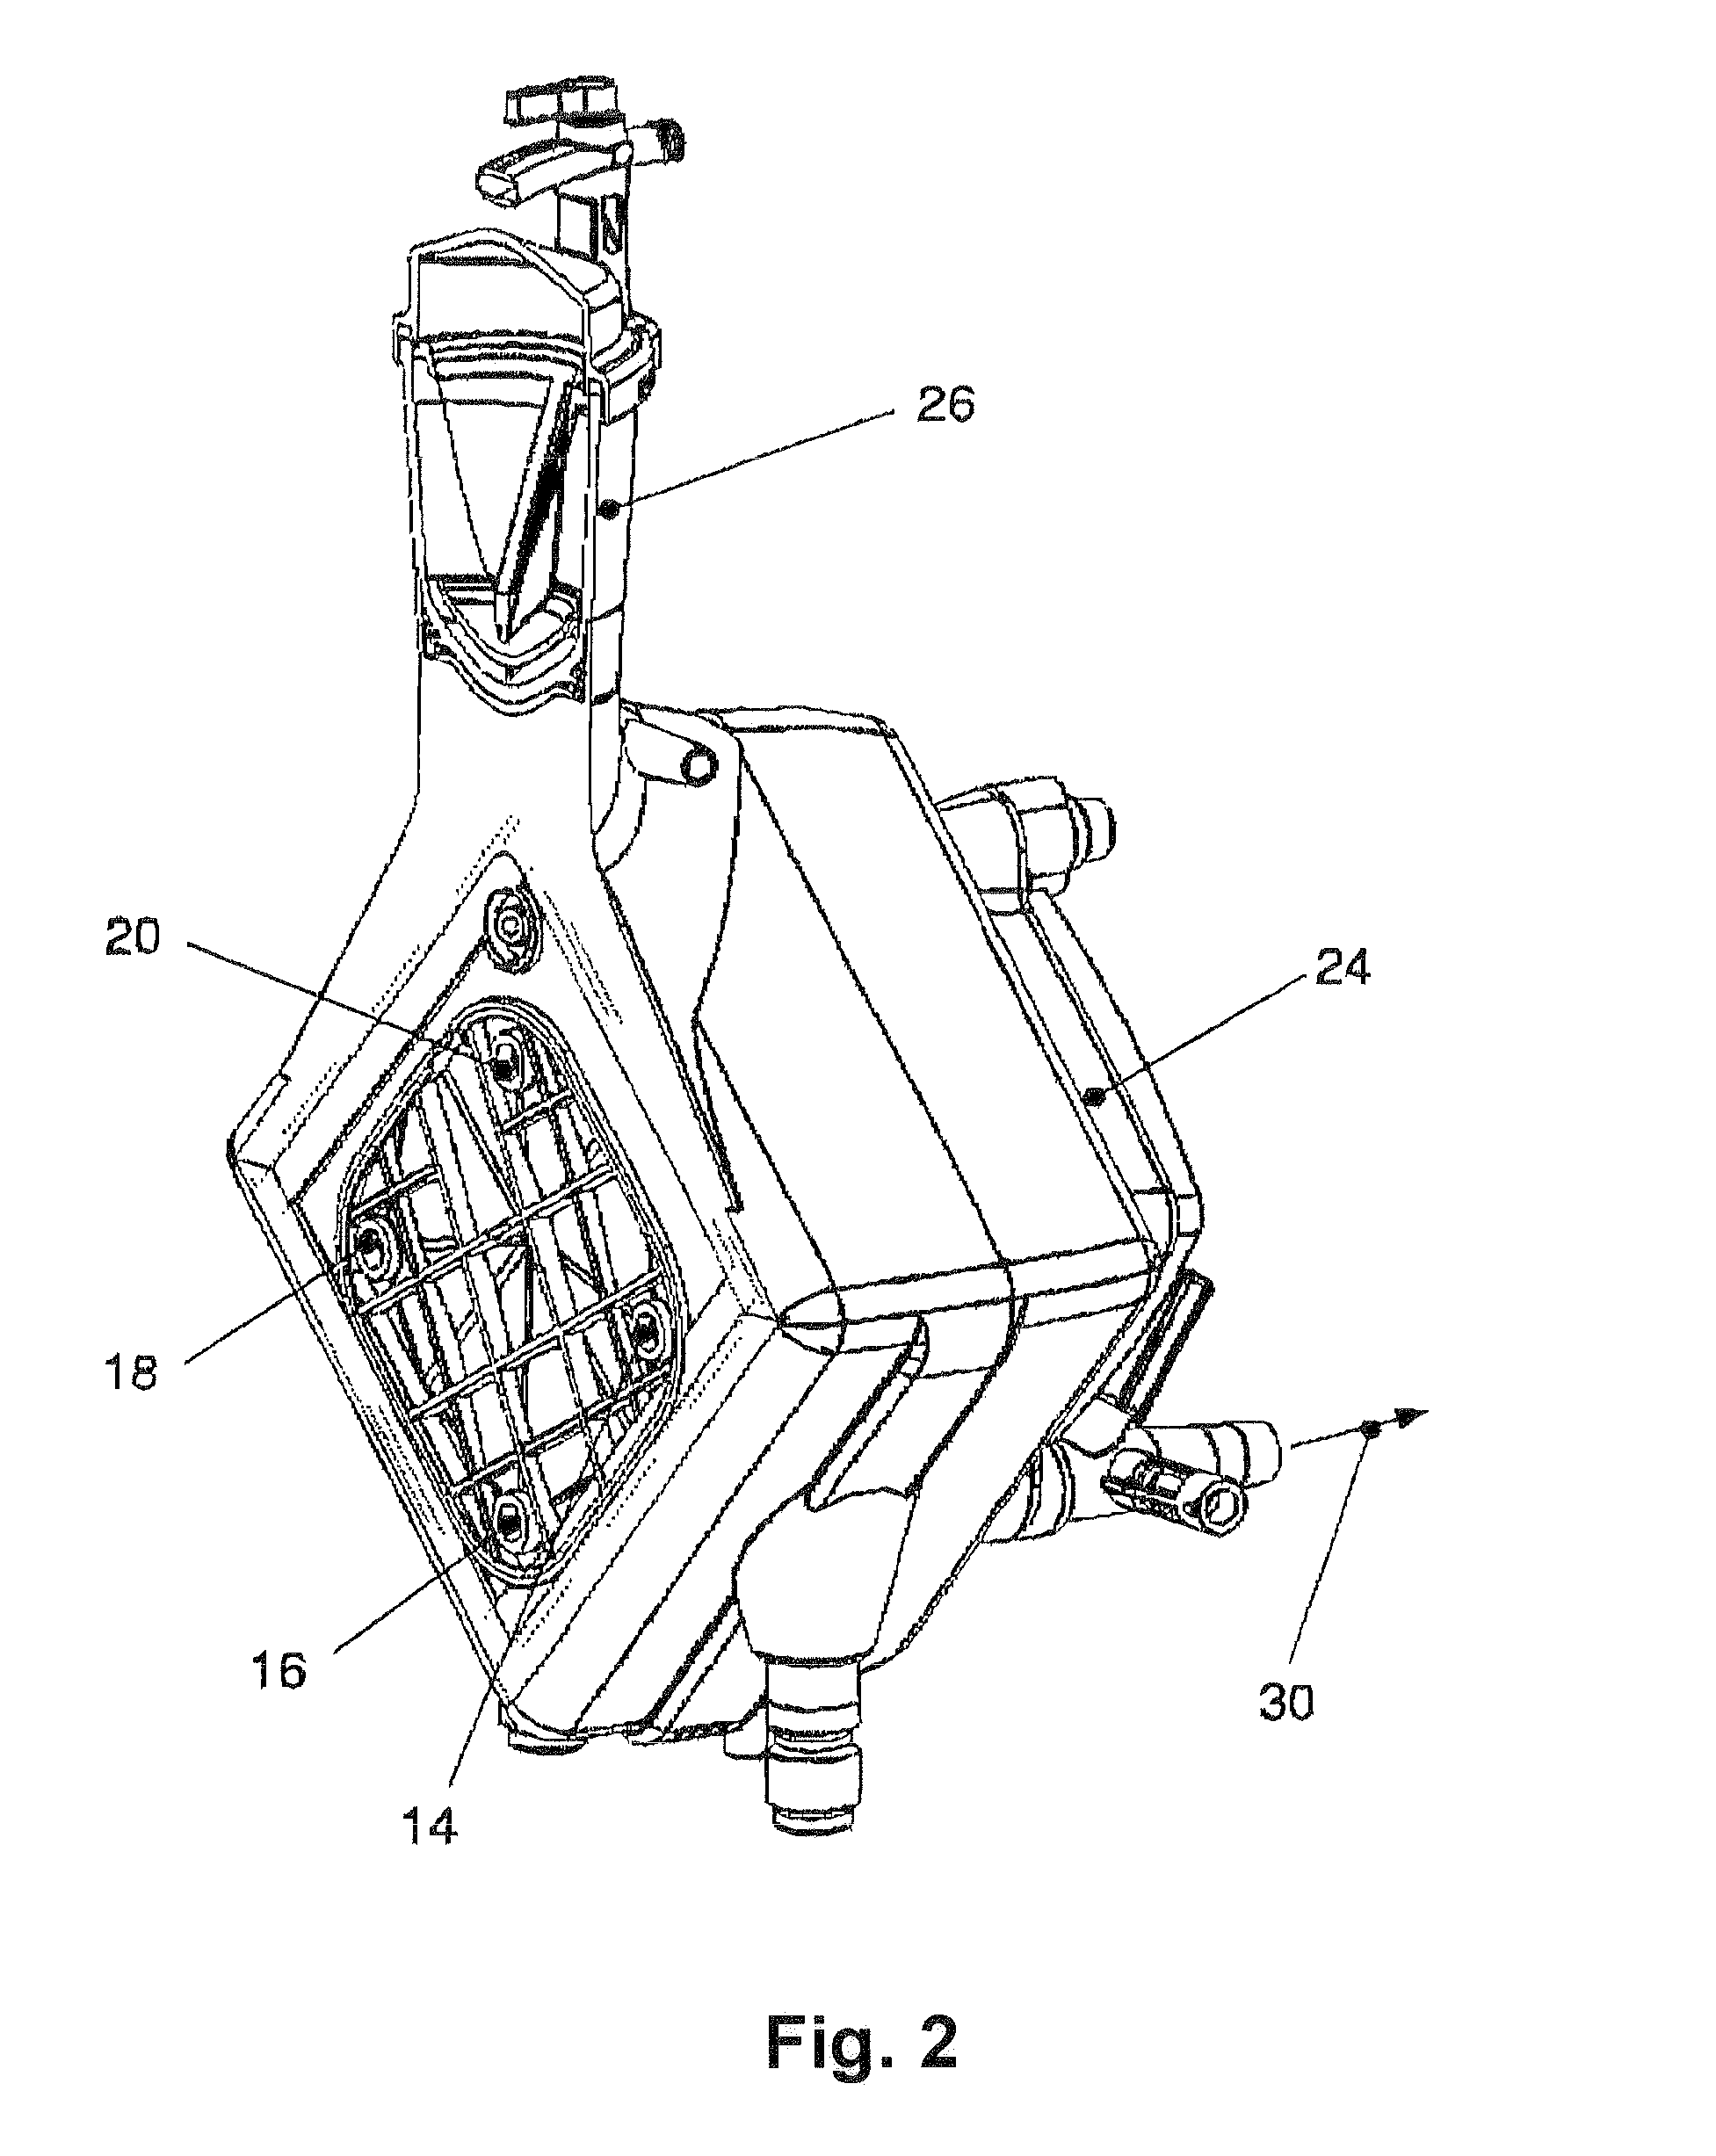 Device for handling blood in extracorporeal blood circulation